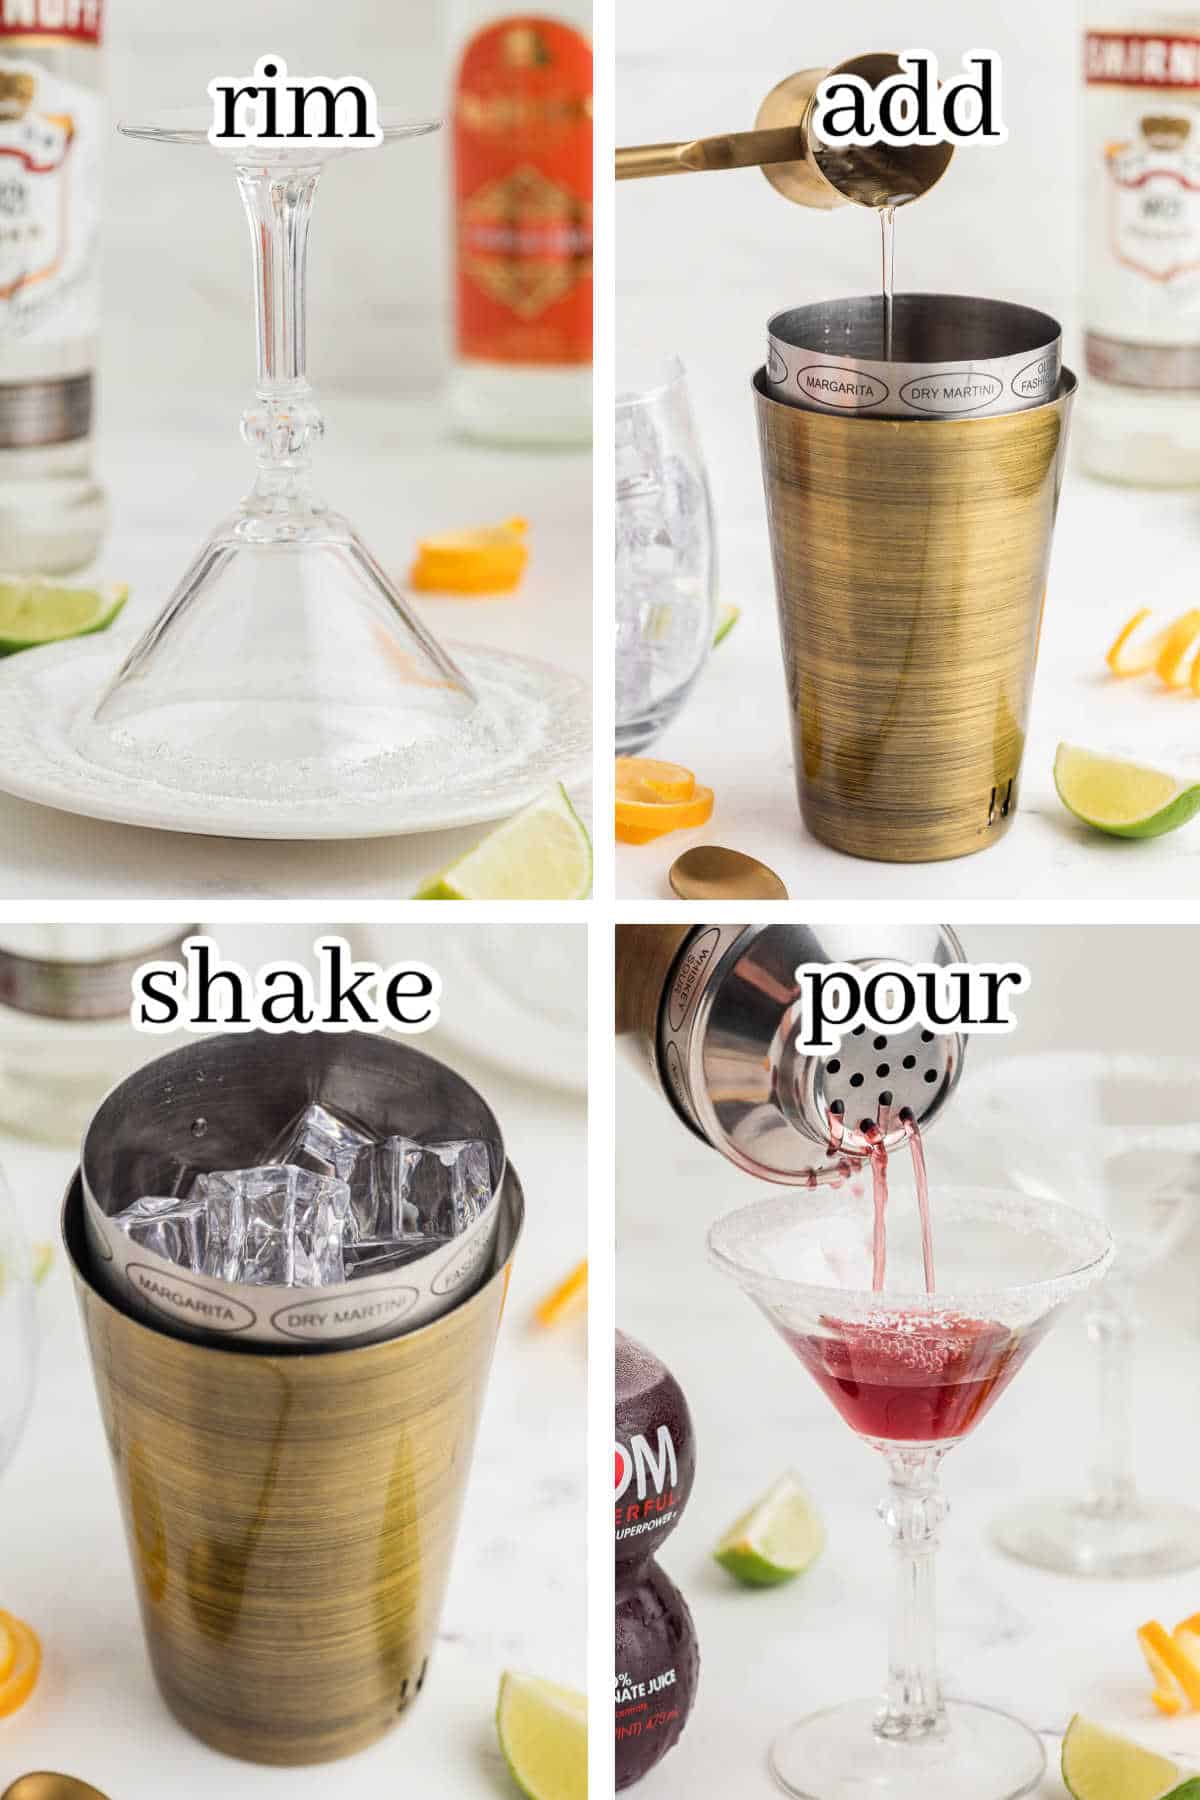 Step-by-step instructions to make the cocktail. With print overlay.